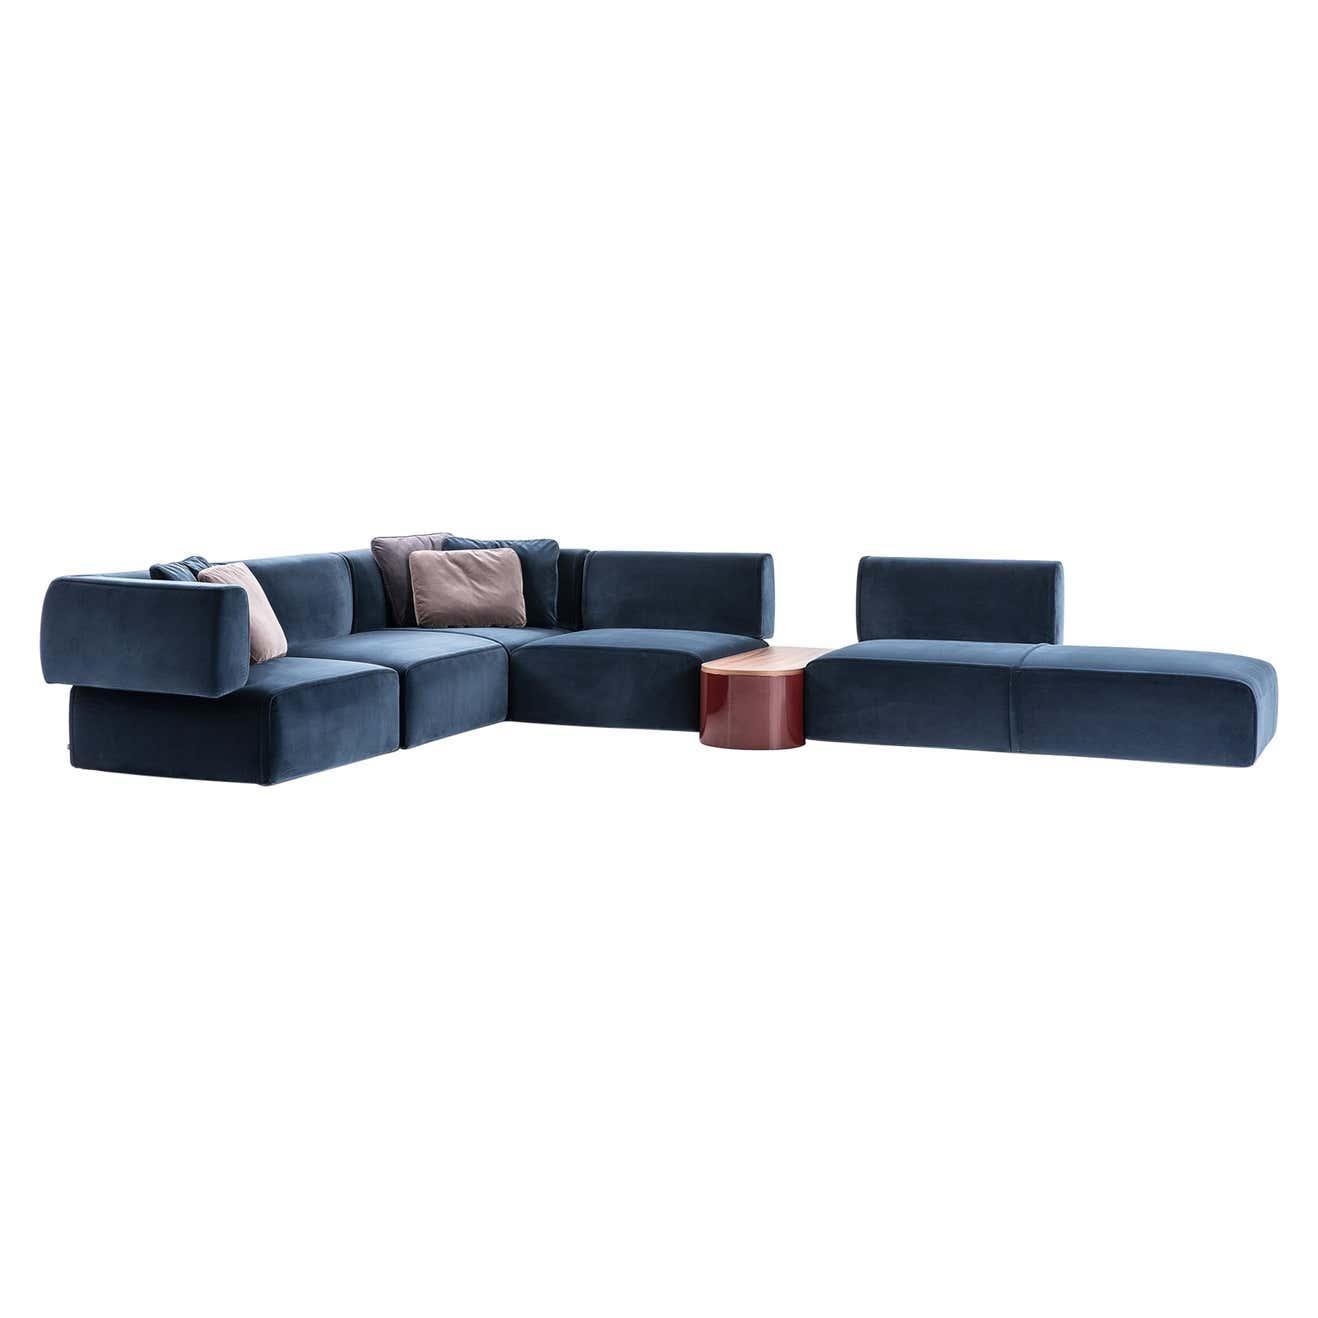 Patricia Urquiola 'Bowy' Modular Sofa with Low Table, Foam and Fabric by Cassina In New Condition For Sale In Barcelona, Barcelona